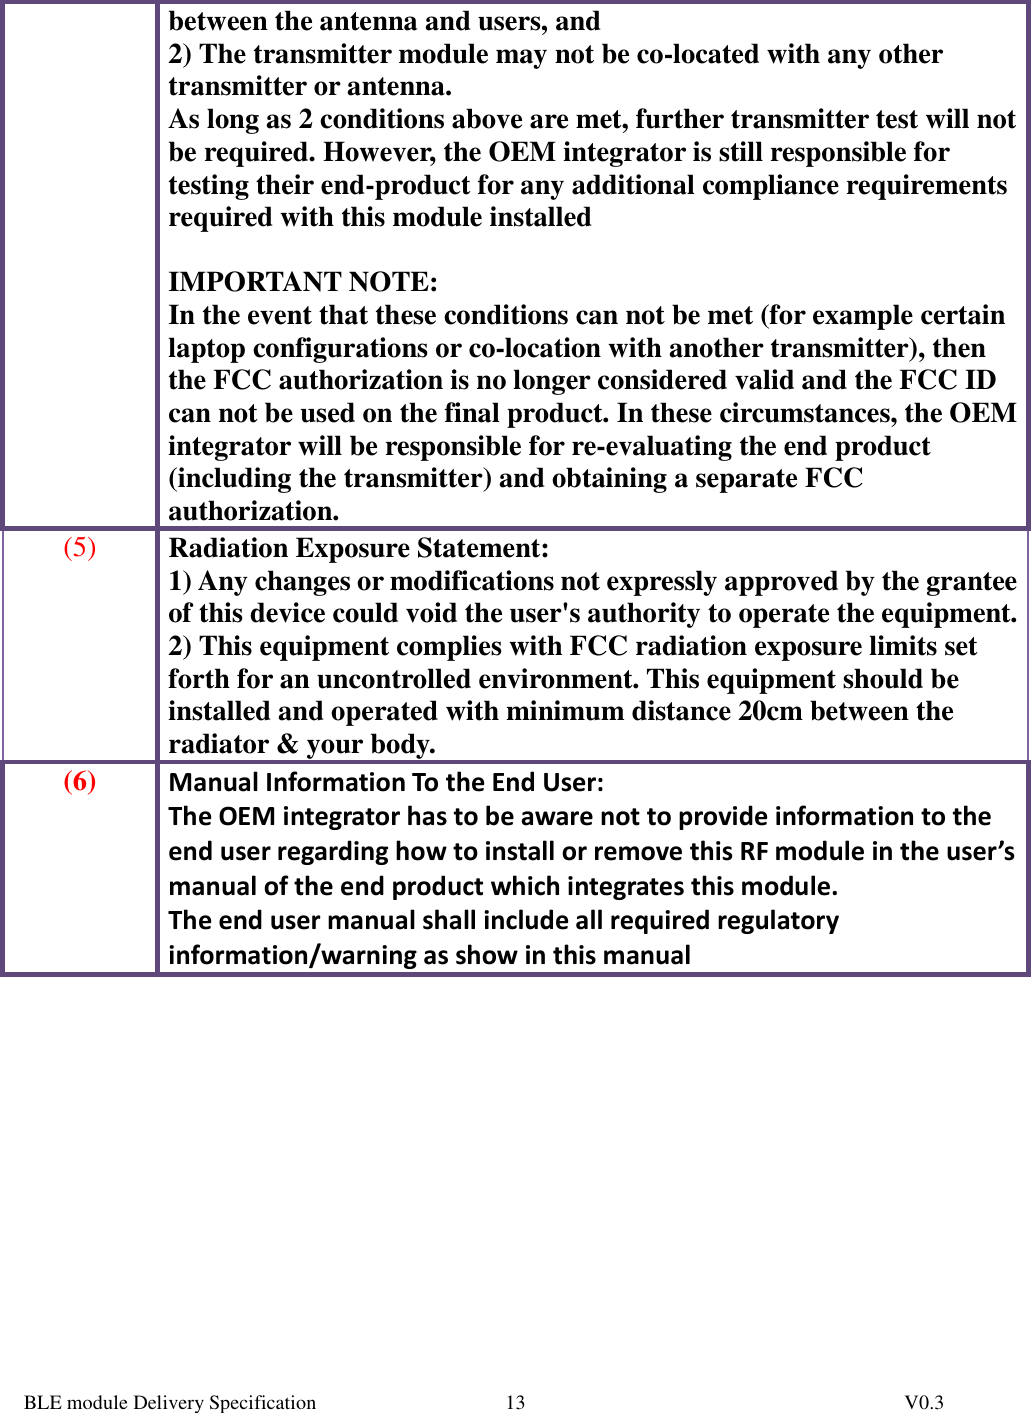  BLE module Delivery Specification          V0.3 13between the antenna and users, and  2) The transmitter module may not be co-located with any other transmitter or antenna. As long as 2 conditions above are met, further transmitter test will not be required. However, the OEM integrator is still responsible for testing their end-product for any additional compliance requirements required with this module installed  IMPORTANT NOTE:  In the event that these conditions can not be met (for example certain laptop configurations or co-location with another transmitter), then the FCC authorization is no longer considered valid and the FCC ID can not be used on the final product. In these circumstances, the OEM integrator will be responsible for re-evaluating the end product (including the transmitter) and obtaining a separate FCC authorization. (5) Radiation Exposure Statement: 1) Any changes or modifications not expressly approved by the grantee of this device could void the user&apos;s authority to operate the equipment. 2) This equipment complies with FCC radiation exposure limits set forth for an uncontrolled environment. This equipment should be installed and operated with minimum distance 20cm between the radiator &amp; your body. (6) Manual Information To the End User: The OEM integrator has to be aware not to provide information to the end user regarding how to install or remove this RF module in the user’s manual of the end product which integrates this module. The end user manual shall include all required regulatory information/warning as show in this manual           